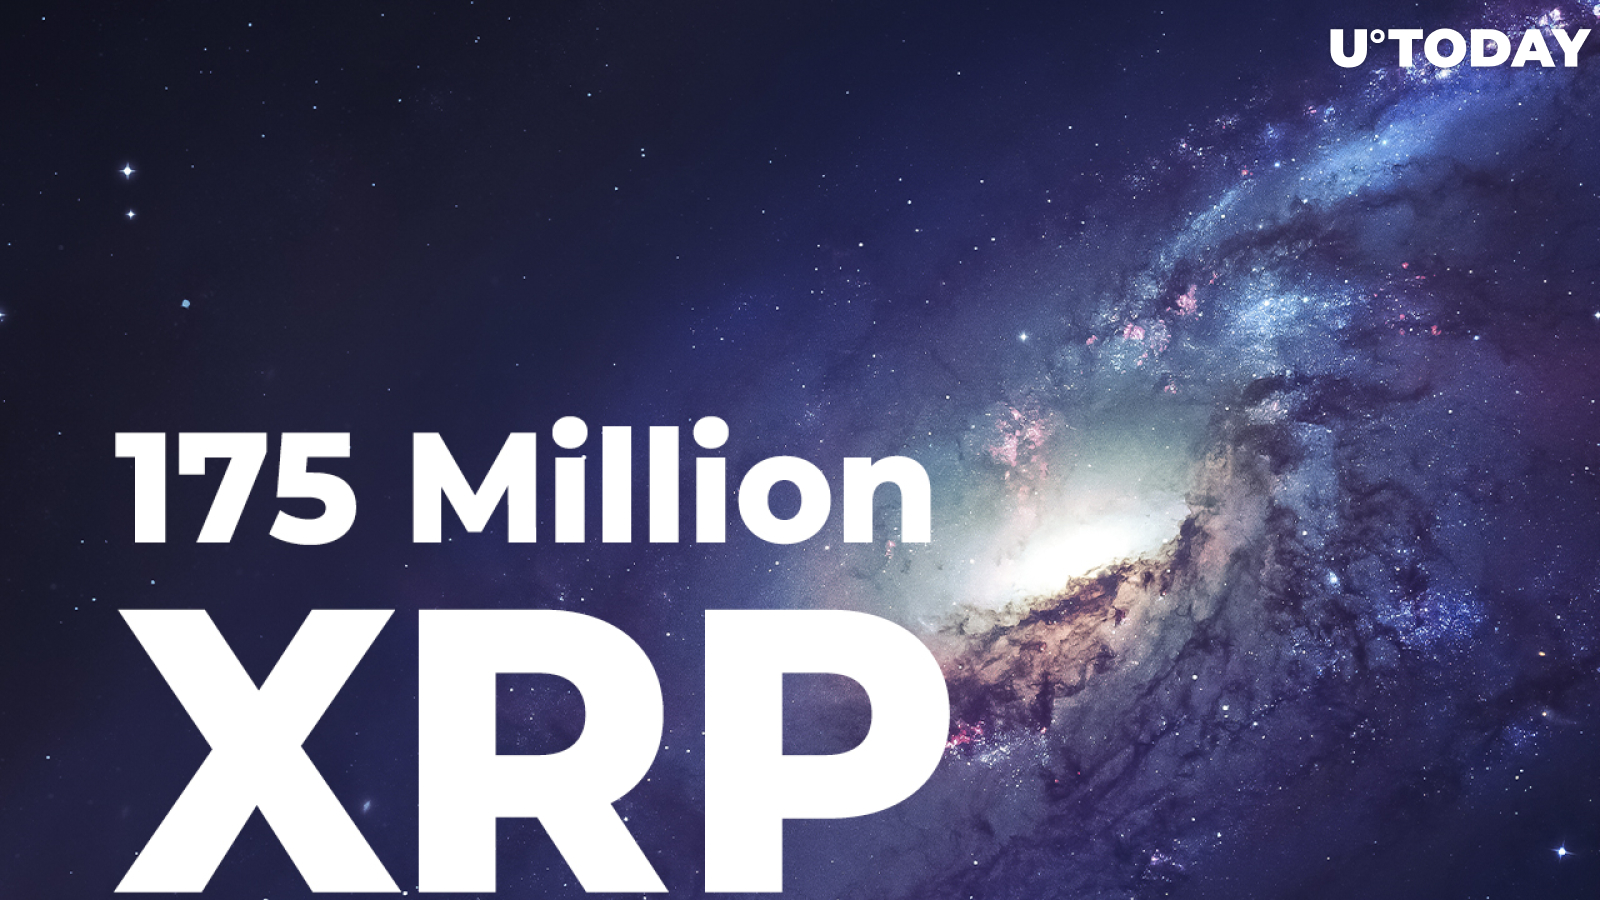 175 Million XRP Shoveled by Galaxy Digital's BitGo; Are Institutions Selling?